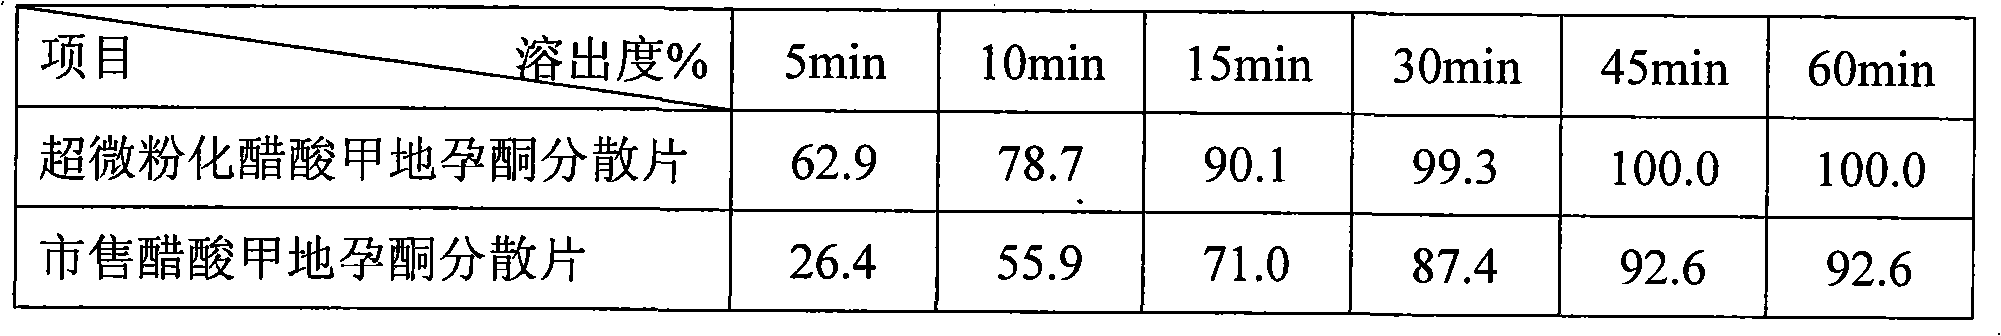 Ultra-micronized megestrol acetate and pharmaceutical composition containing same